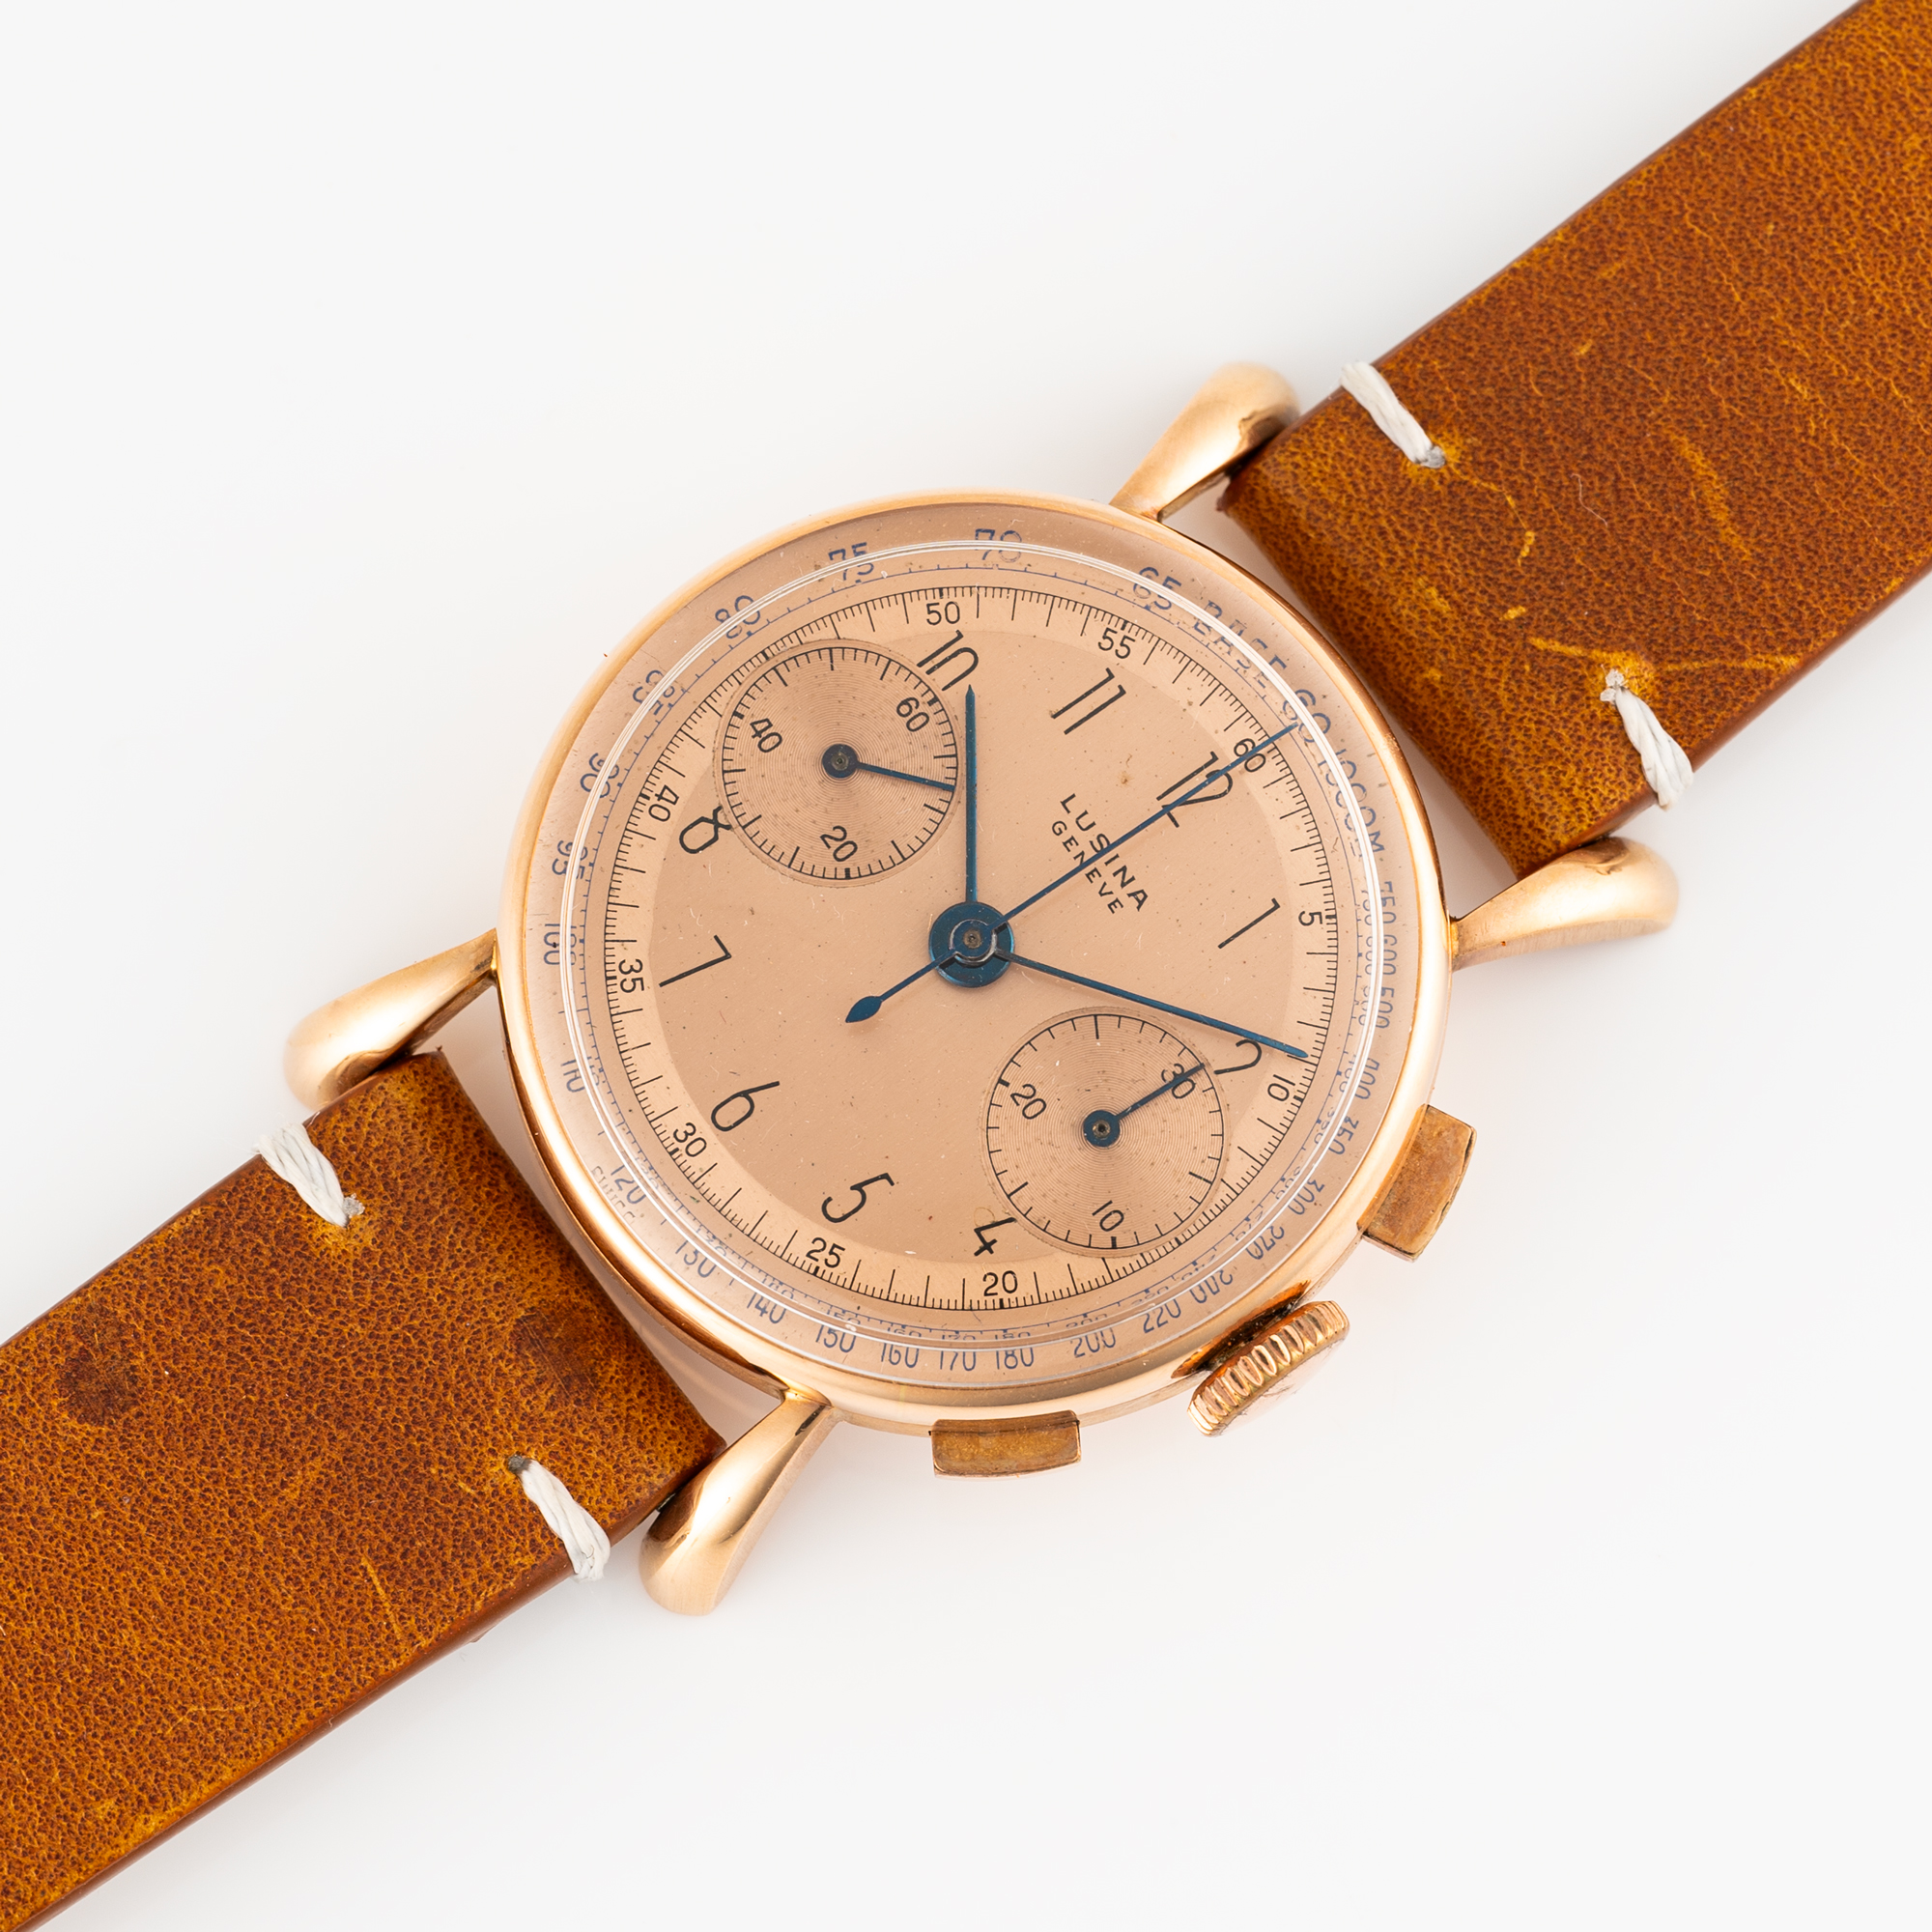 A RARE GENTLEMAN'S SIZE 18K SOLID PINK GOLD LUSINA CHRONOGRAPH WRIST WATCH CIRCA 1940s Movement: - Image 4 of 8